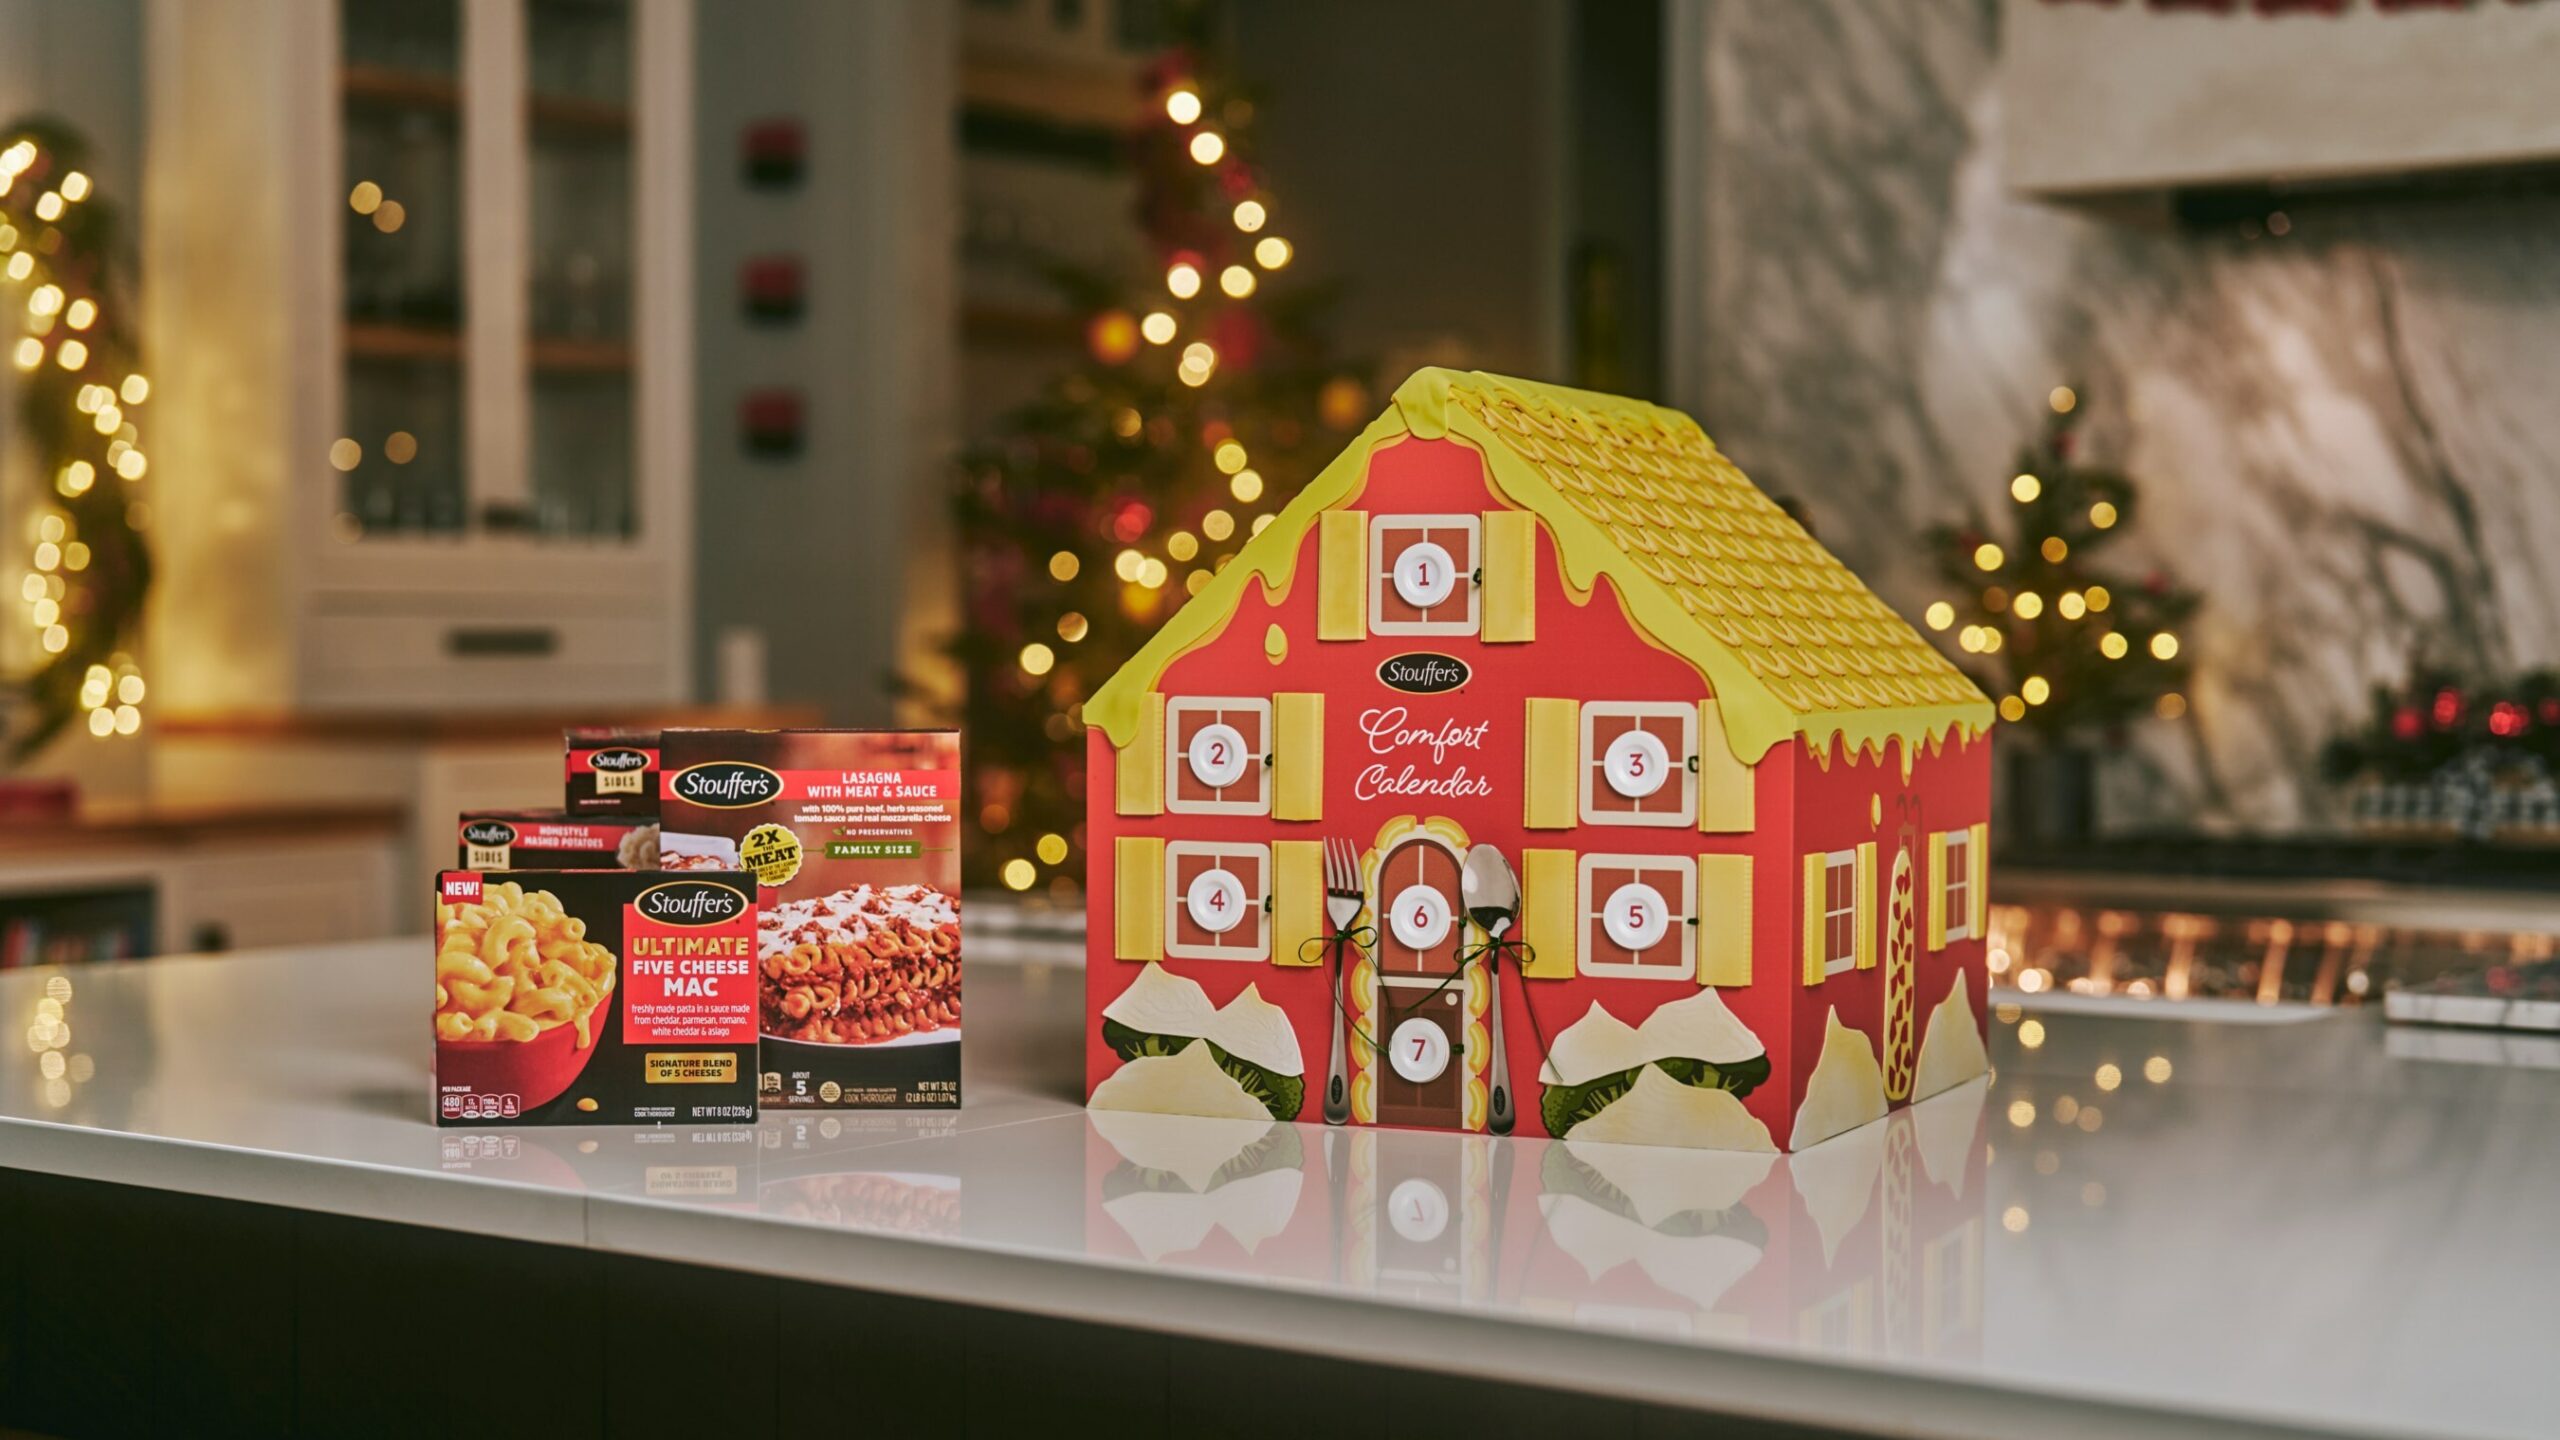 Stouffer’s Released An Advent Calendar Stuffed With All of Your Favorite Stouffer’s Frozen Meals